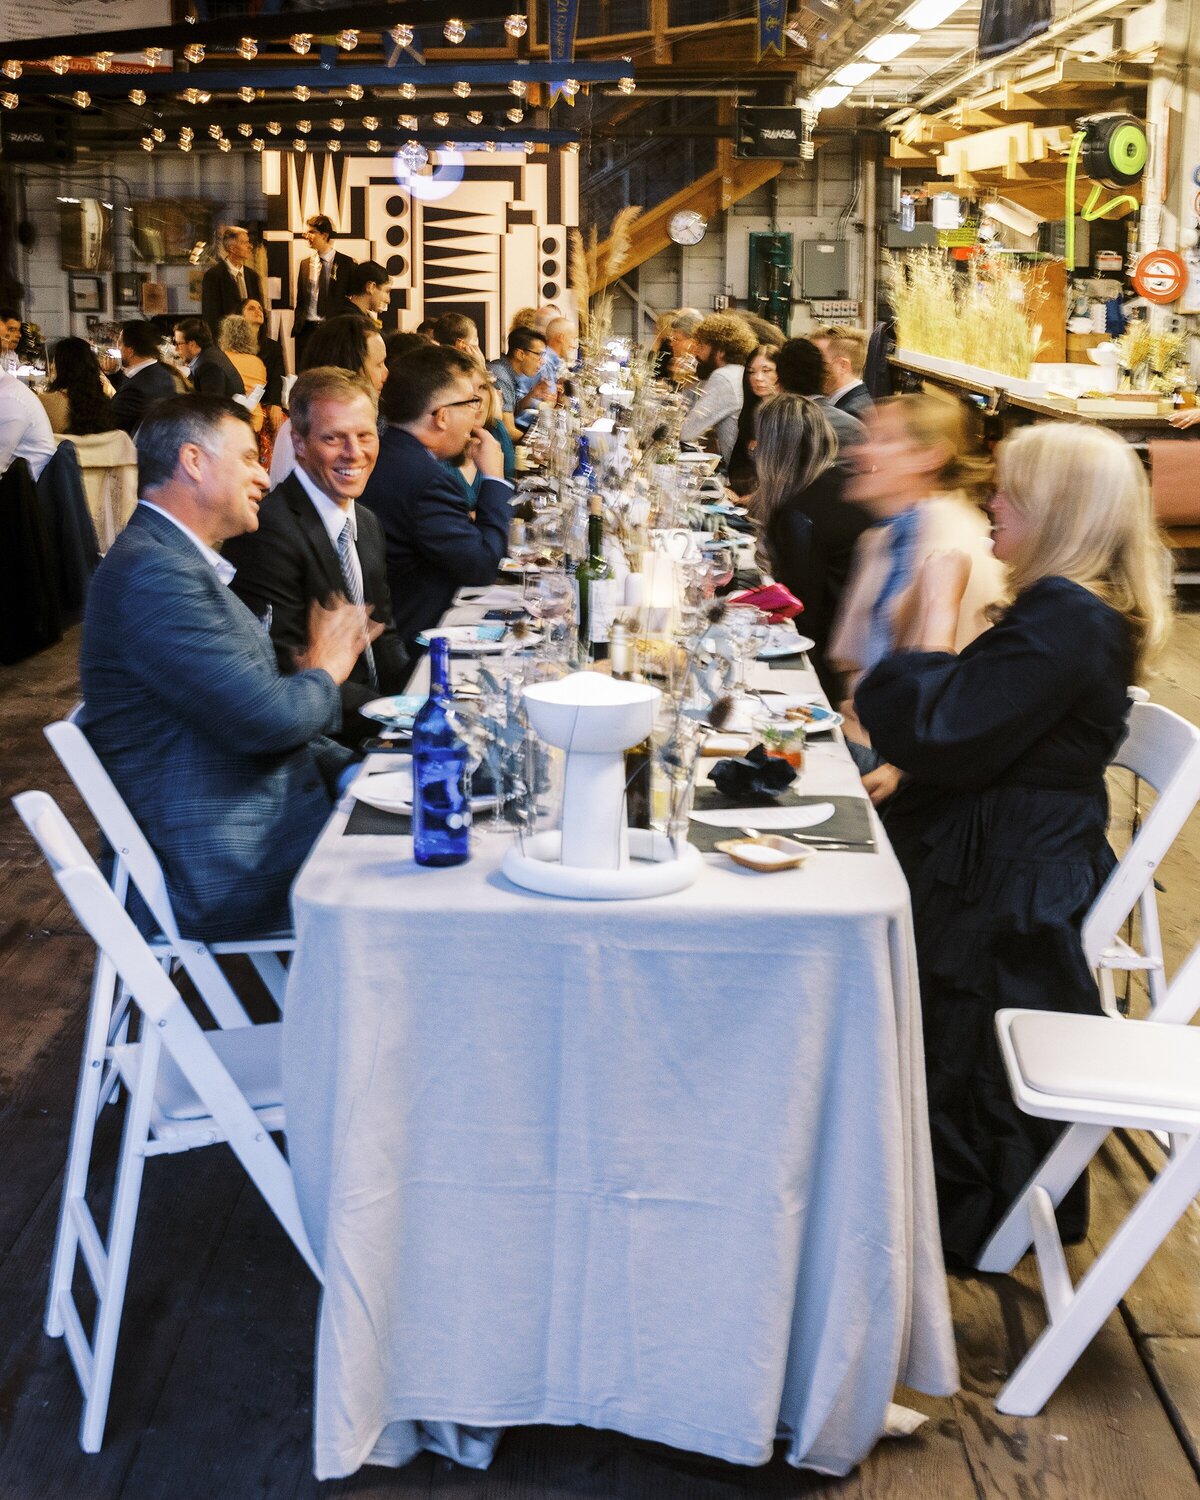 Wedding guests enjoy their dinner at long banquet tables in a converted boatyard in Sausalito